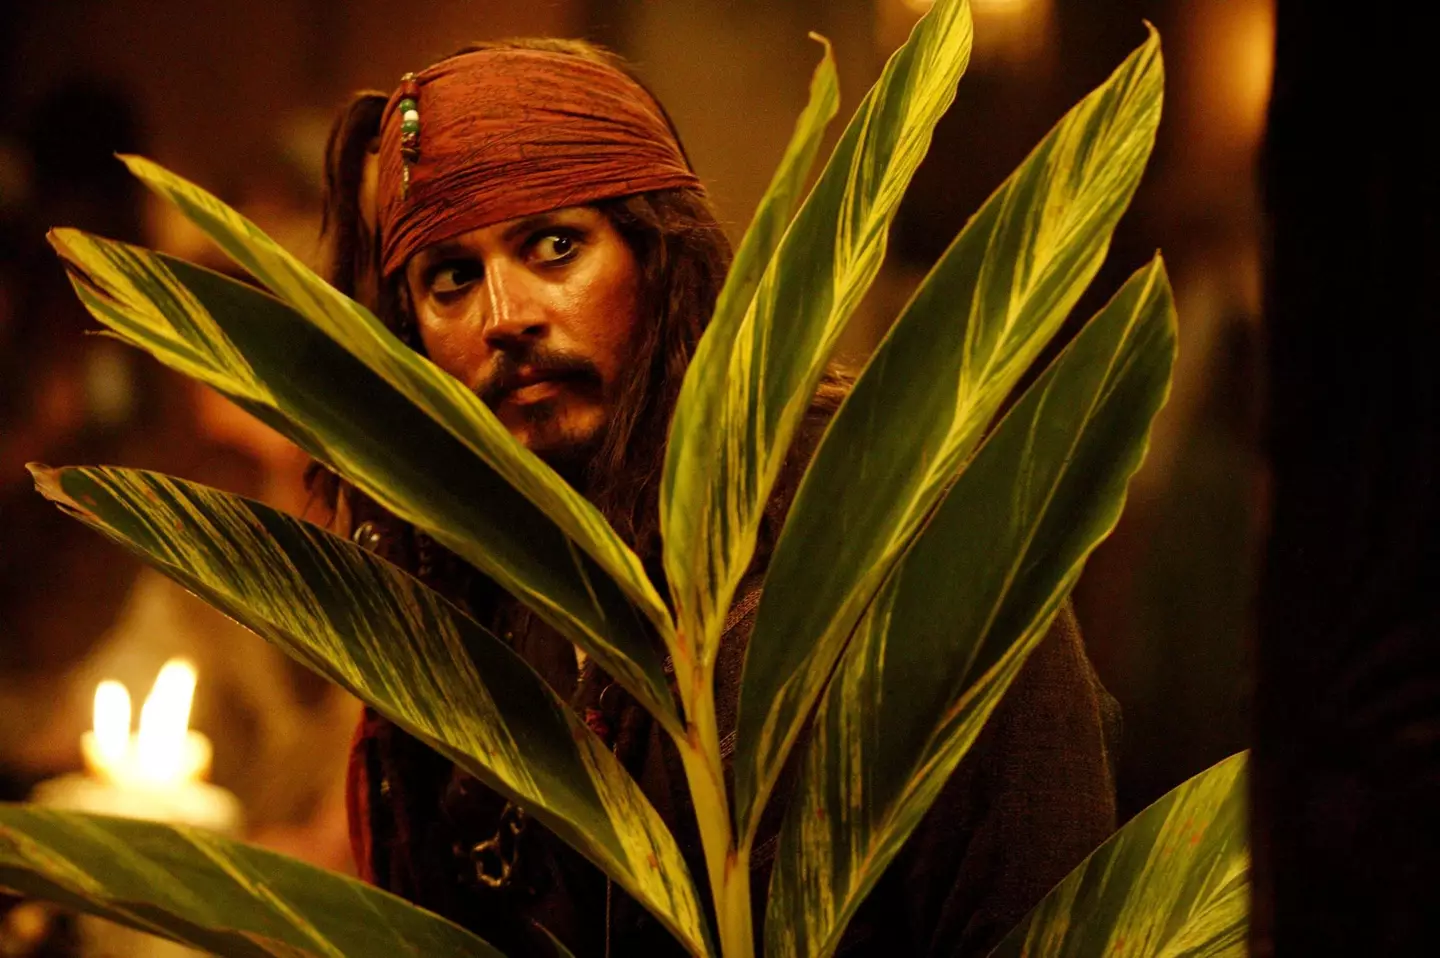 Depp reckoned that Jack Sparrow's brain must be pretty boiled, so he decided to try some extreme heat for himself.